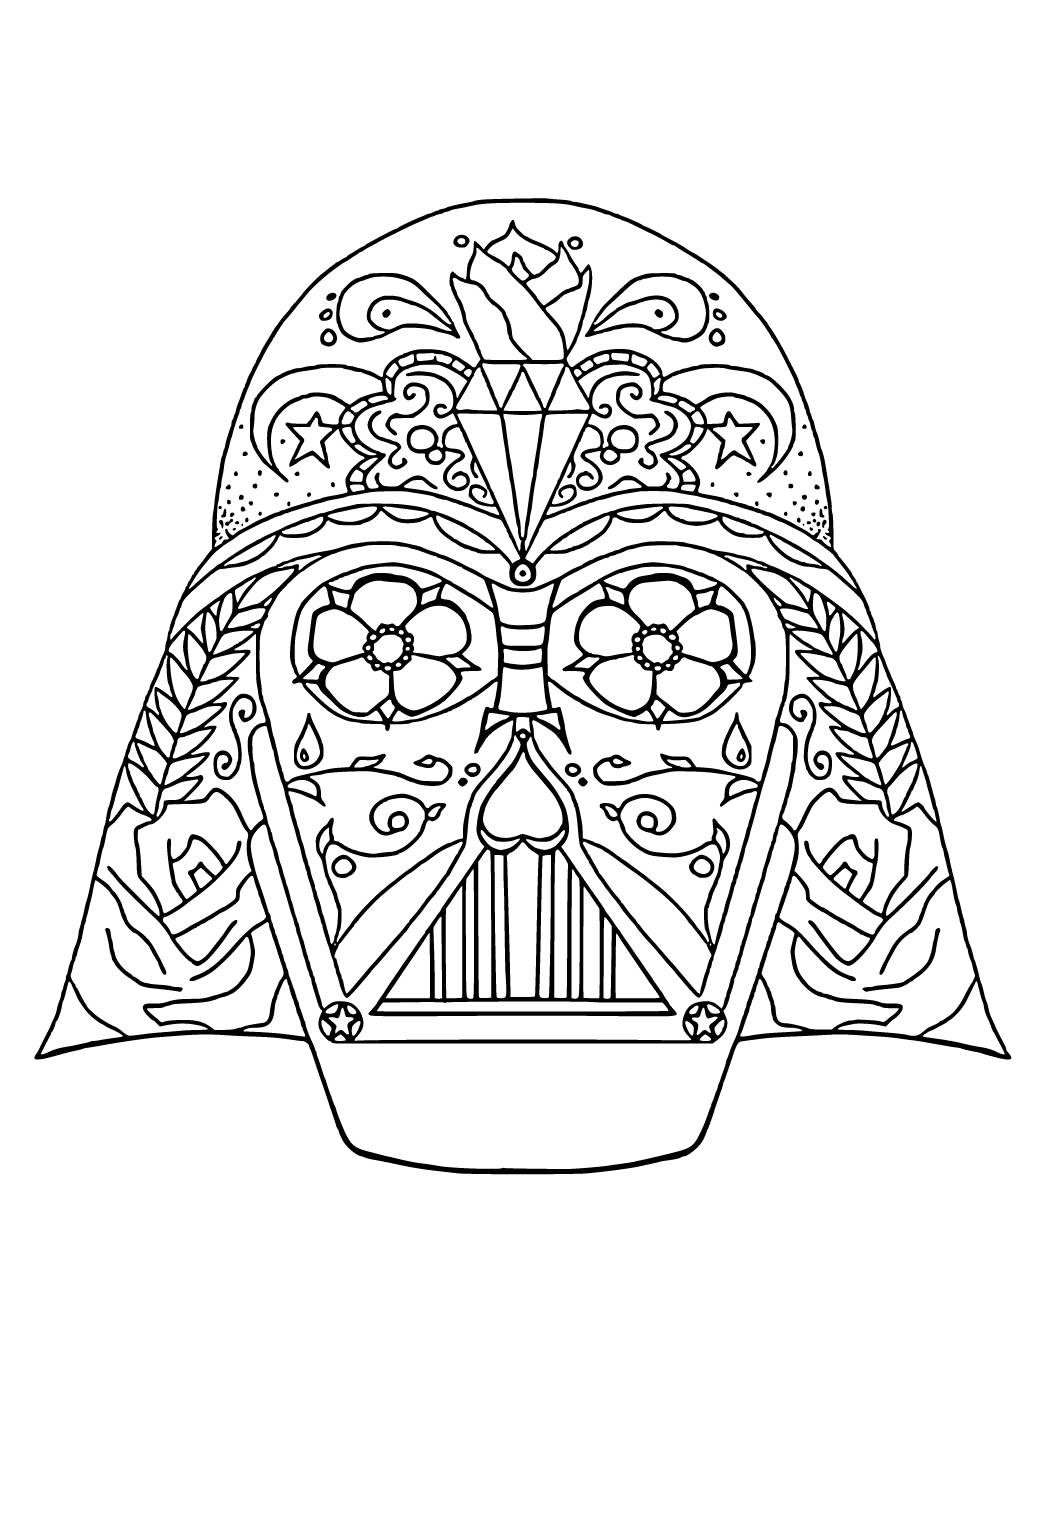 Free printable darth vader difficult coloring page for adults and kids